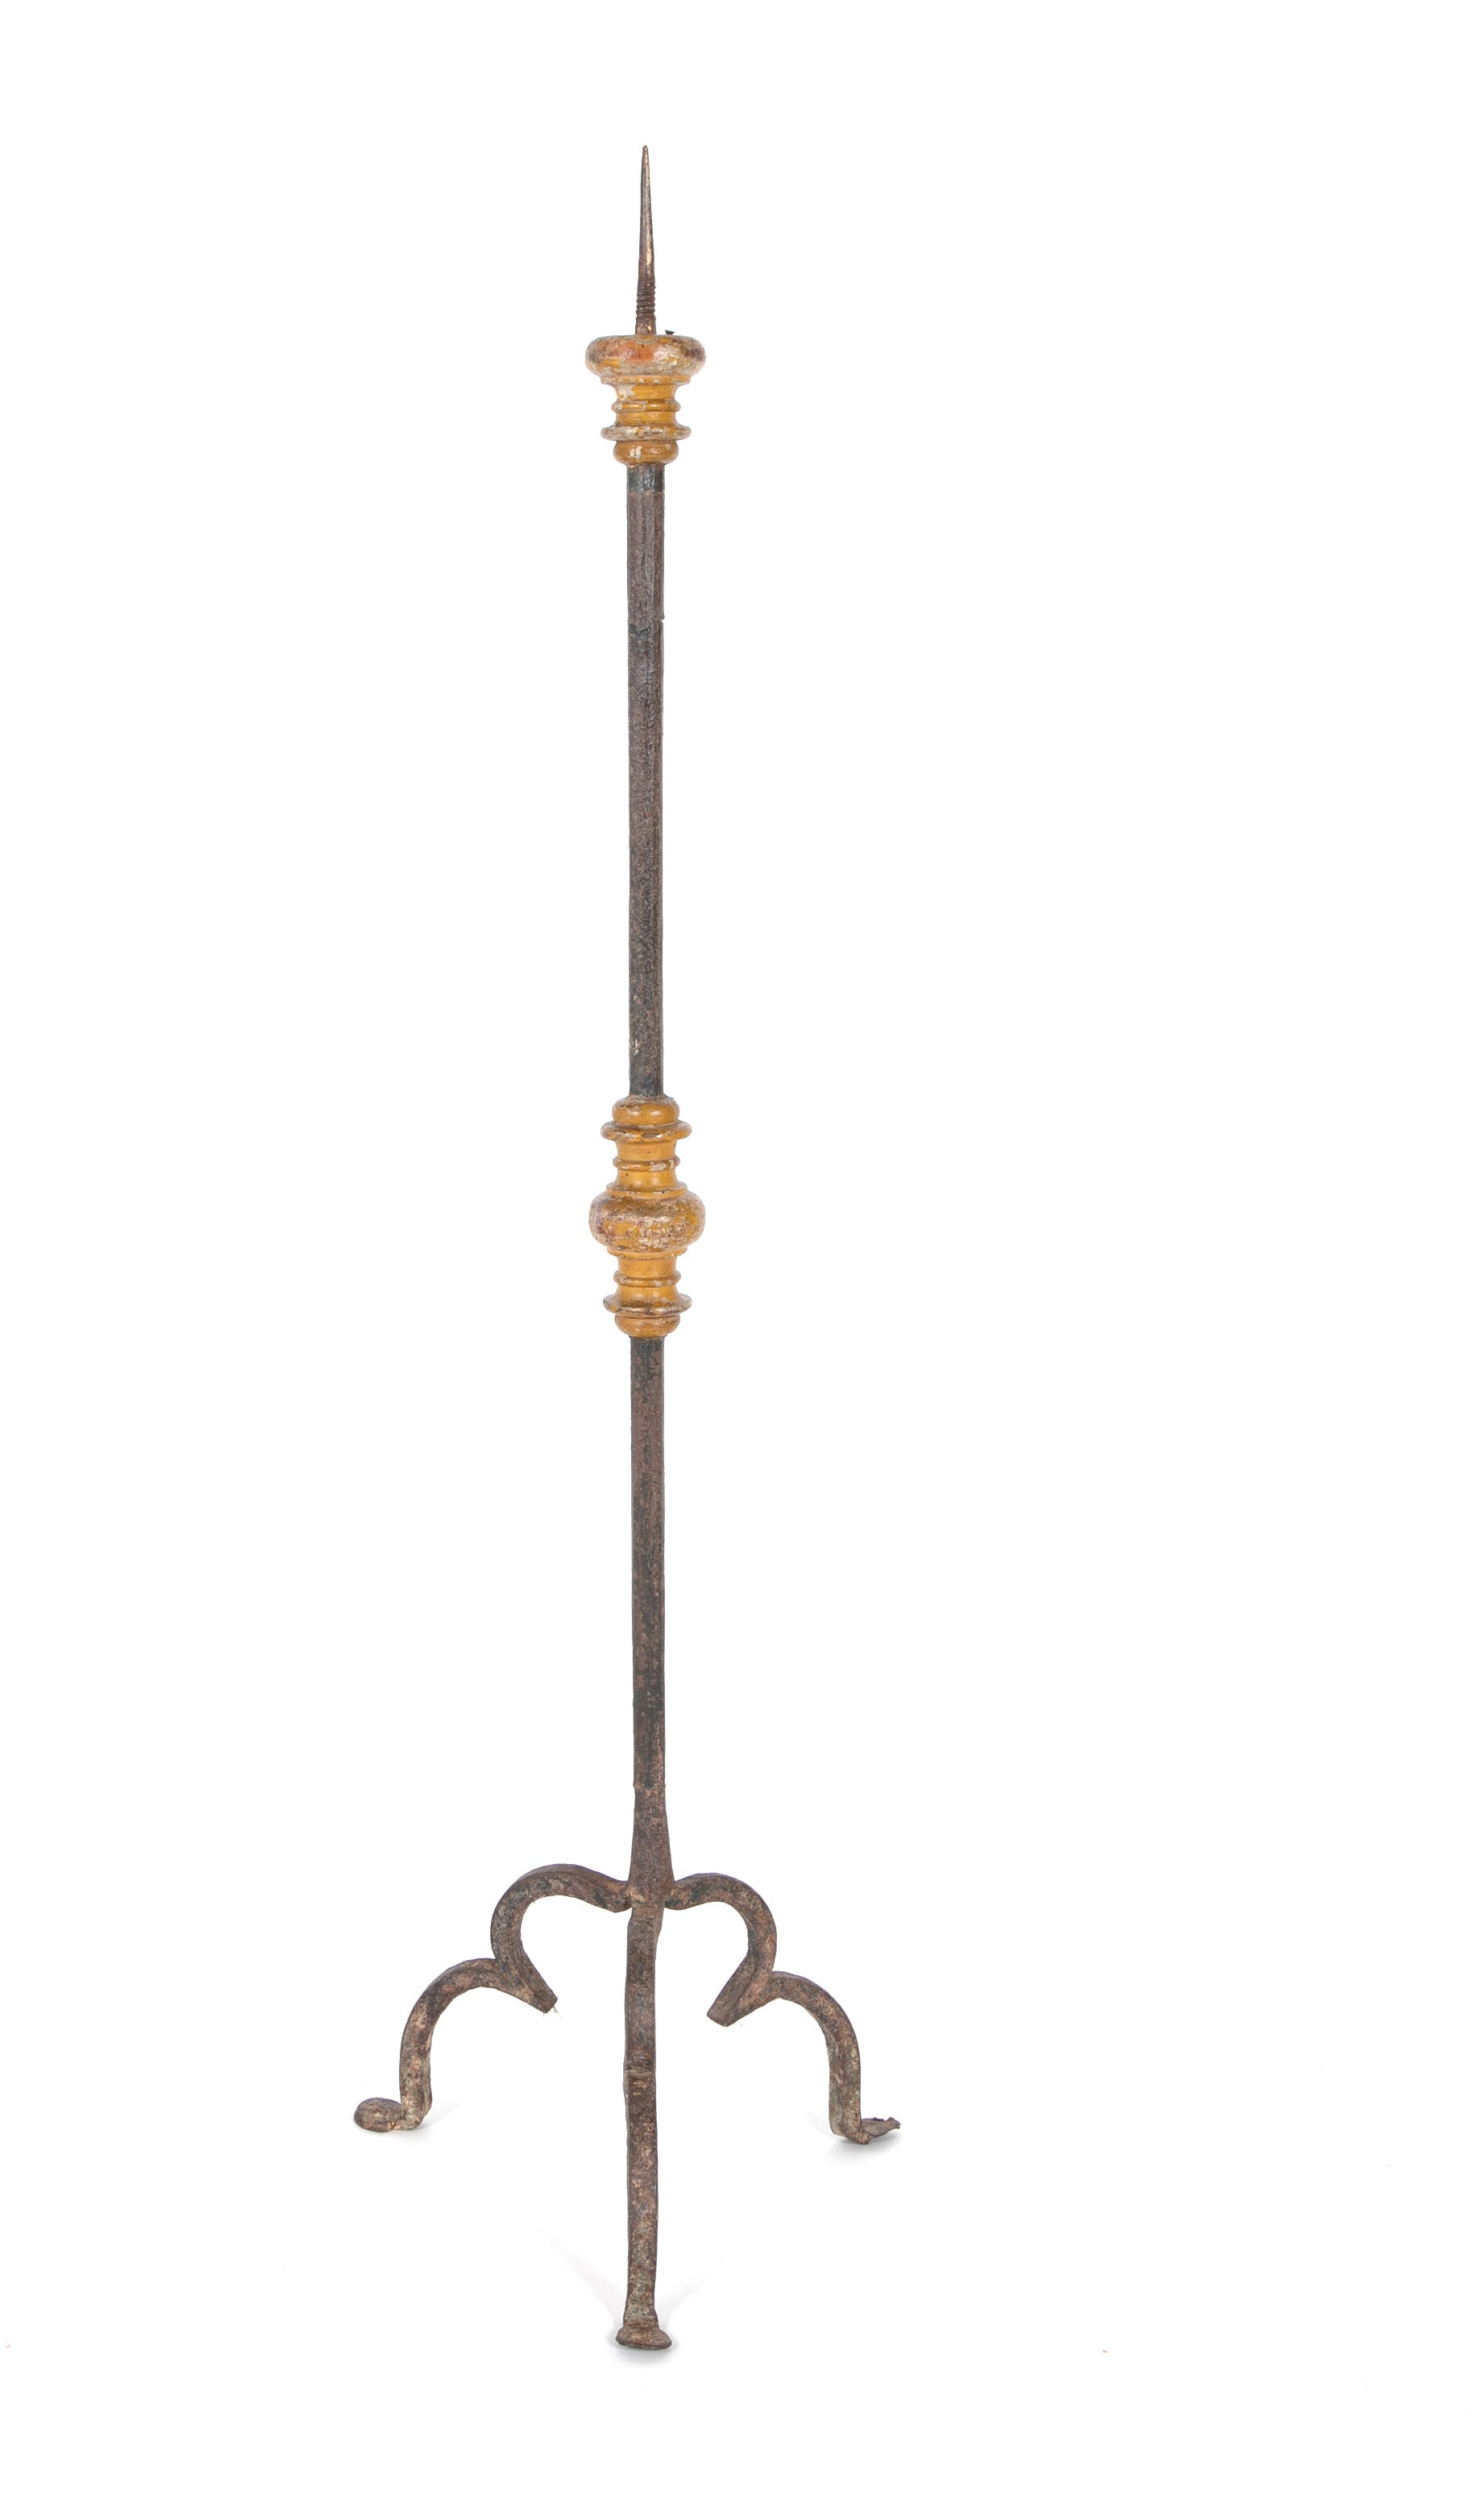 Wrought Iron Pricket Candlestick